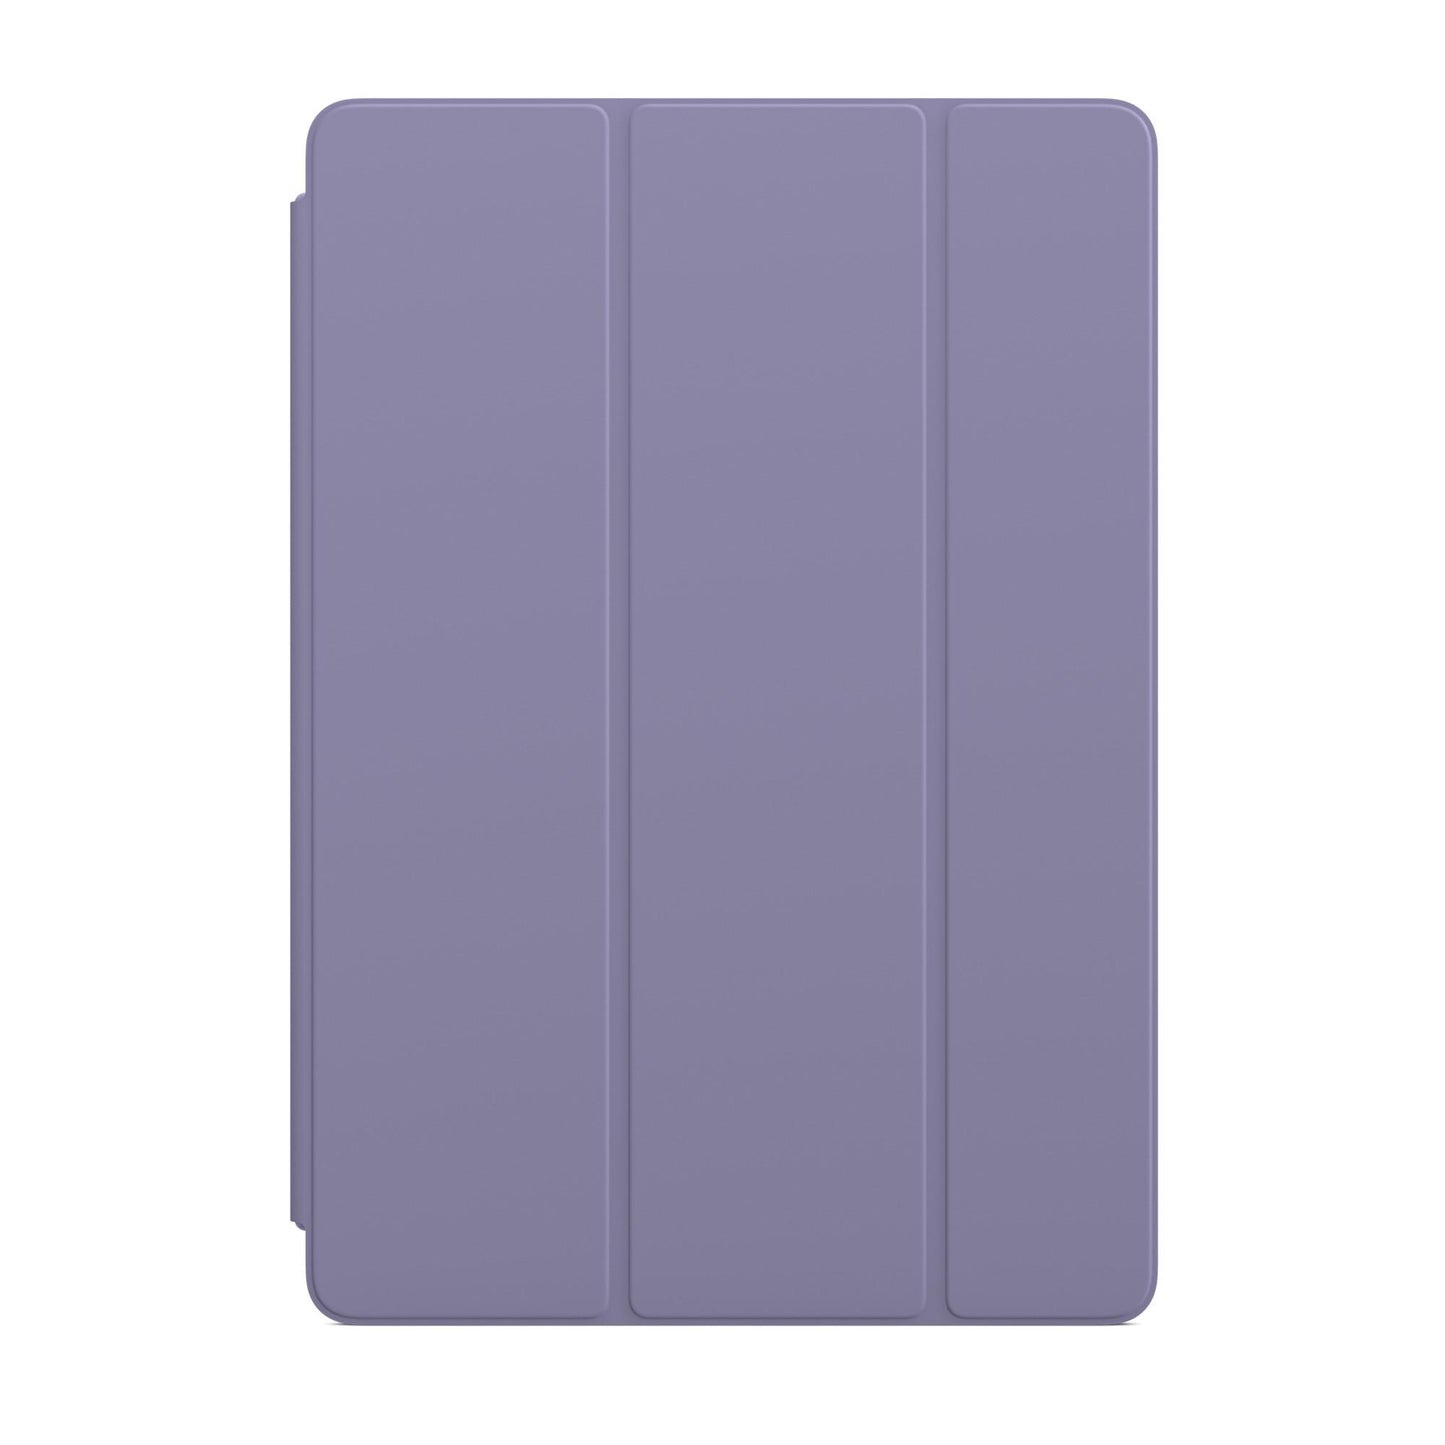 Smart Cover for iPad (9th generation) - English Lavender